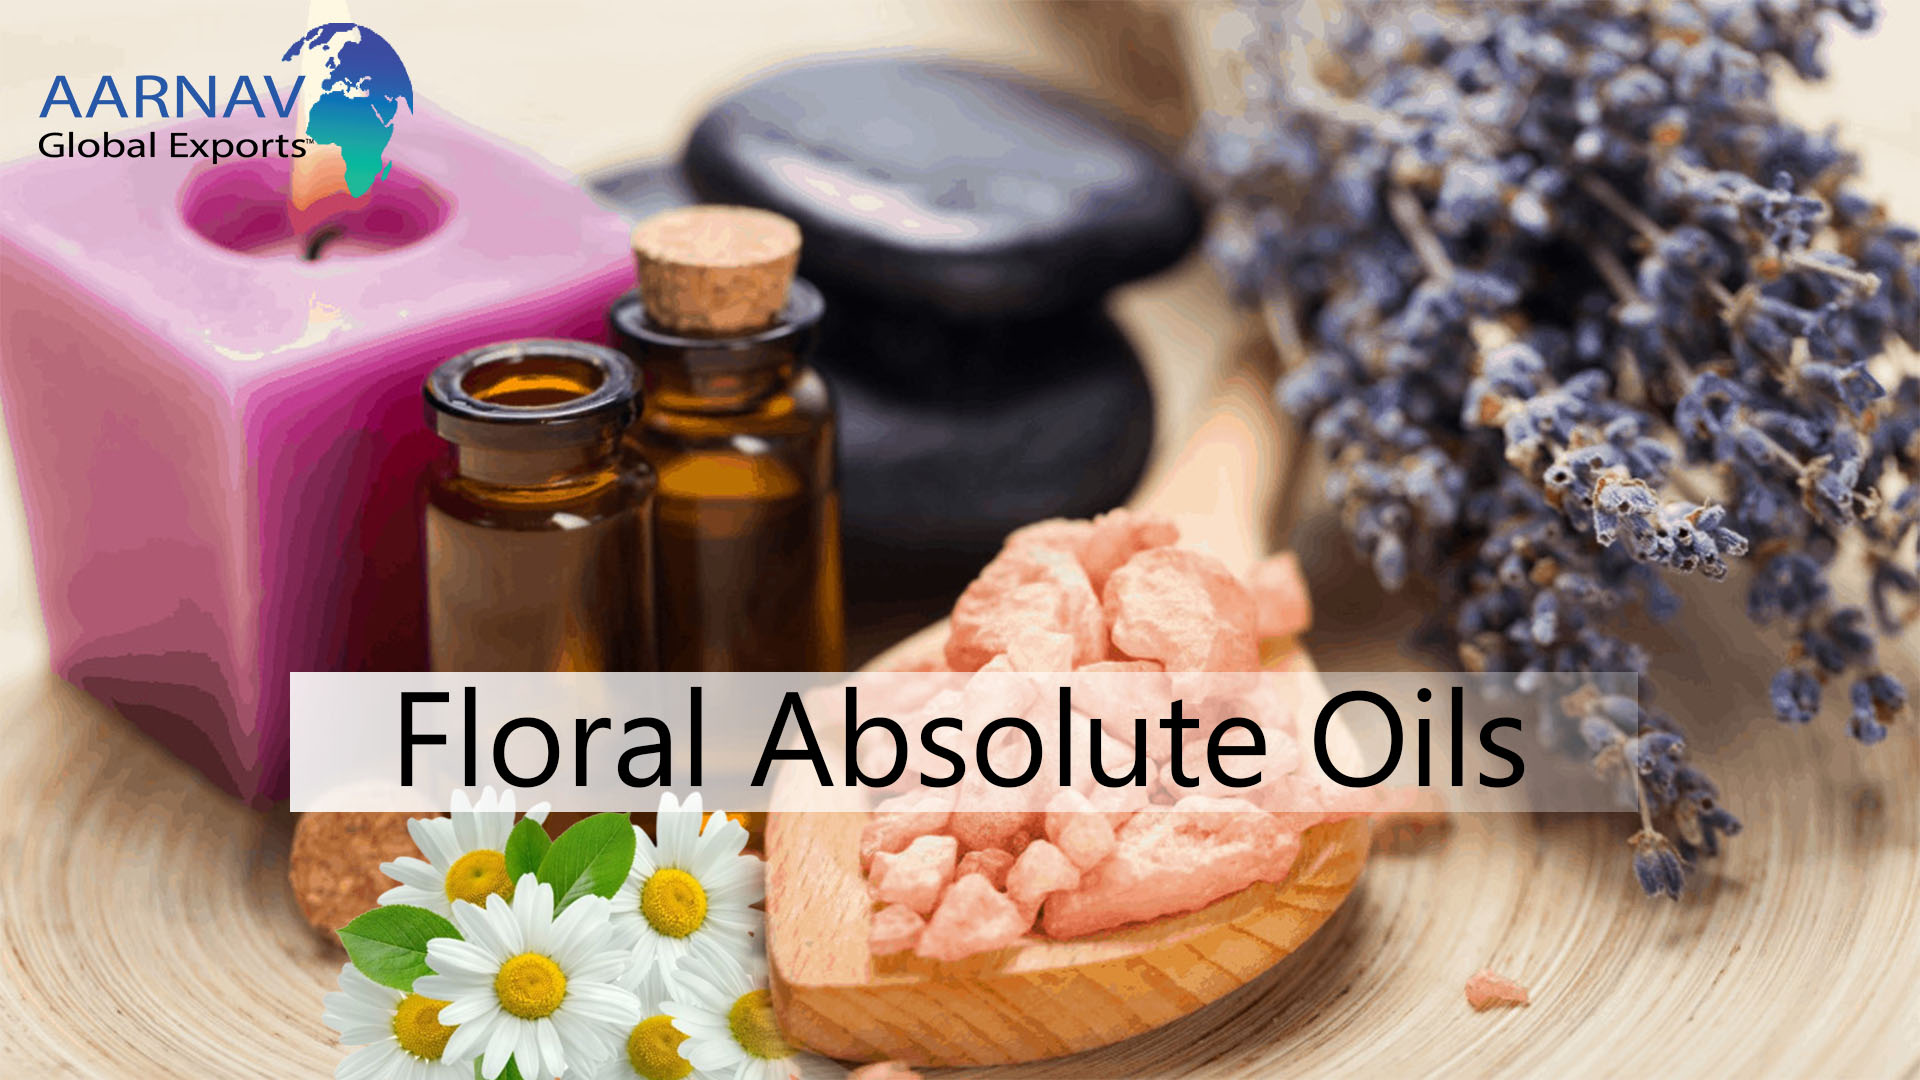 Buy Floral Oil Wholesale Online at the best pricesHealth and BeautyHealth Care ProductsGhaziabadVaishali